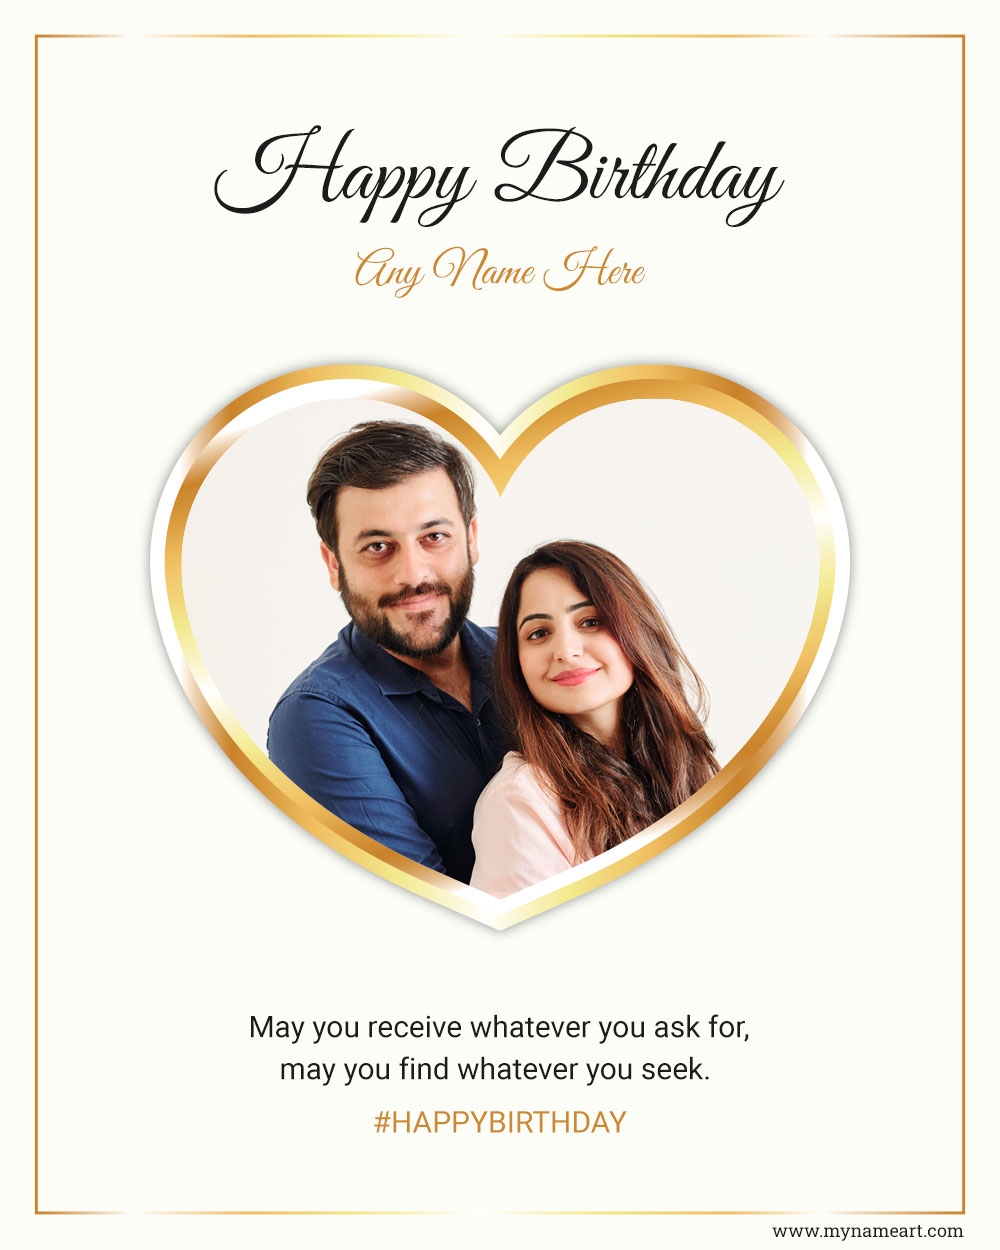 Top 999 Birthday Wishes For Wife Images Amazing Collection Birthday Wishes For Wife Images